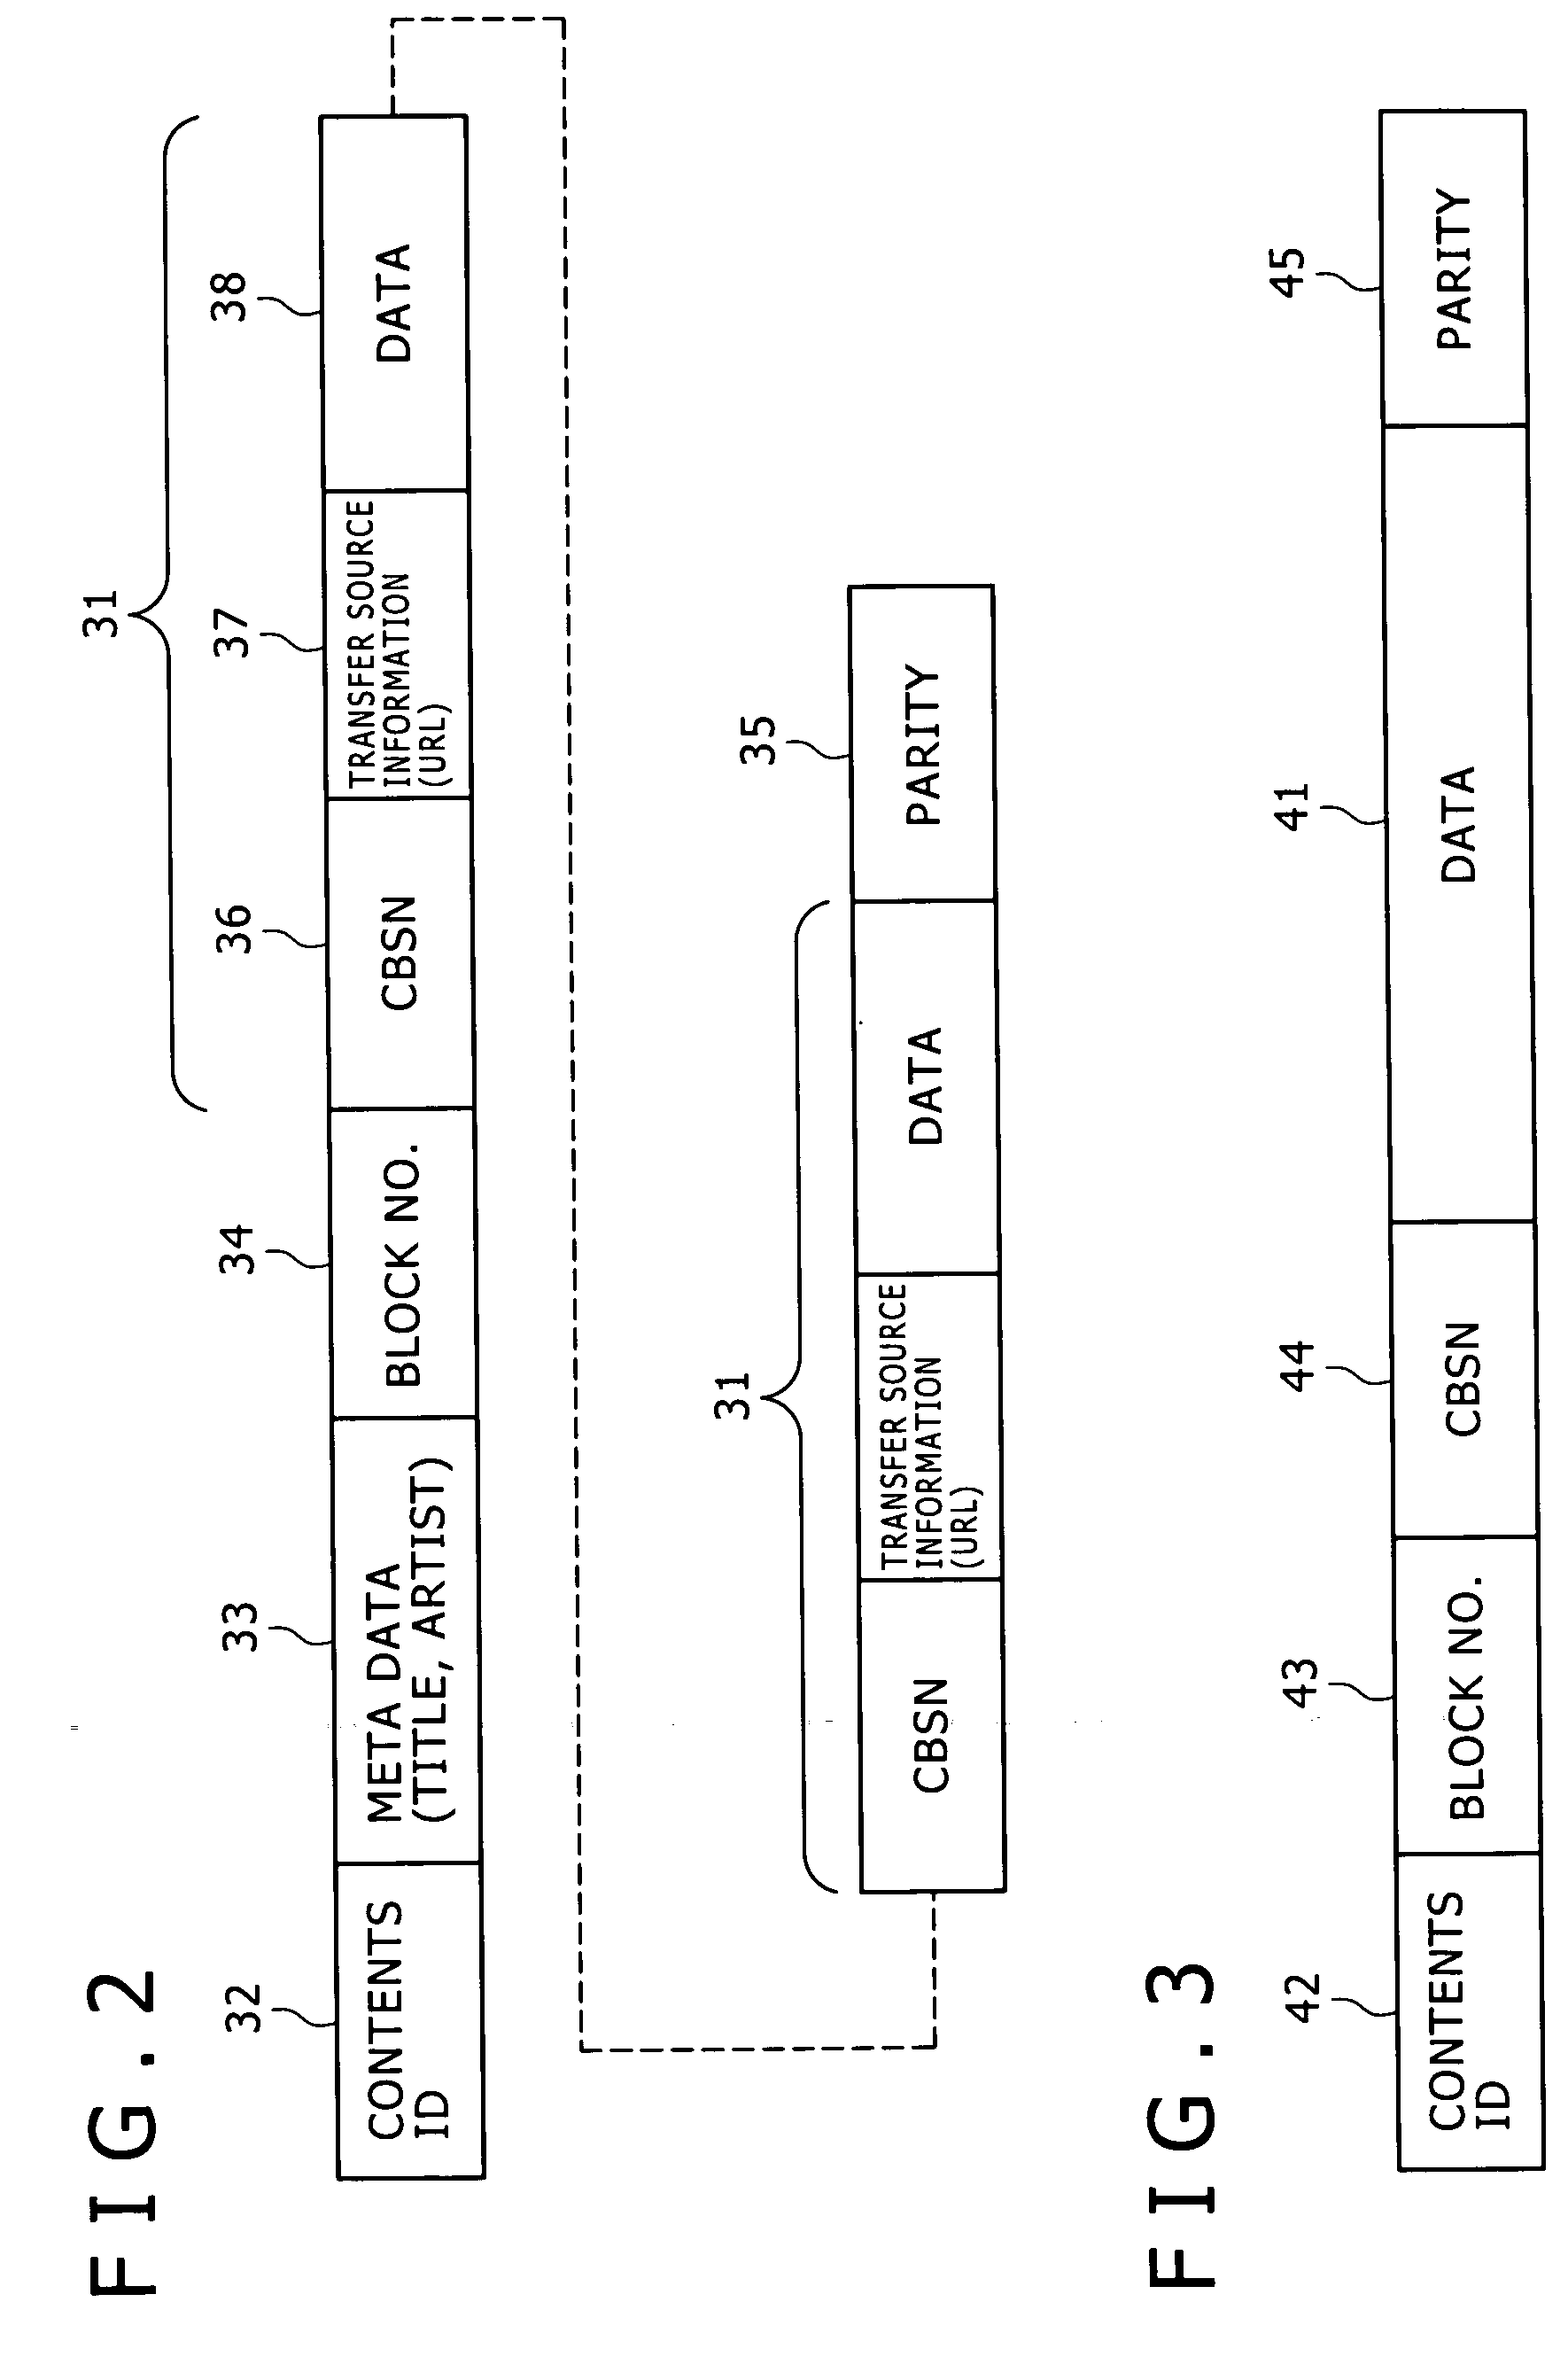 Mobile terminal, contents delivery system, and contents reproduction program